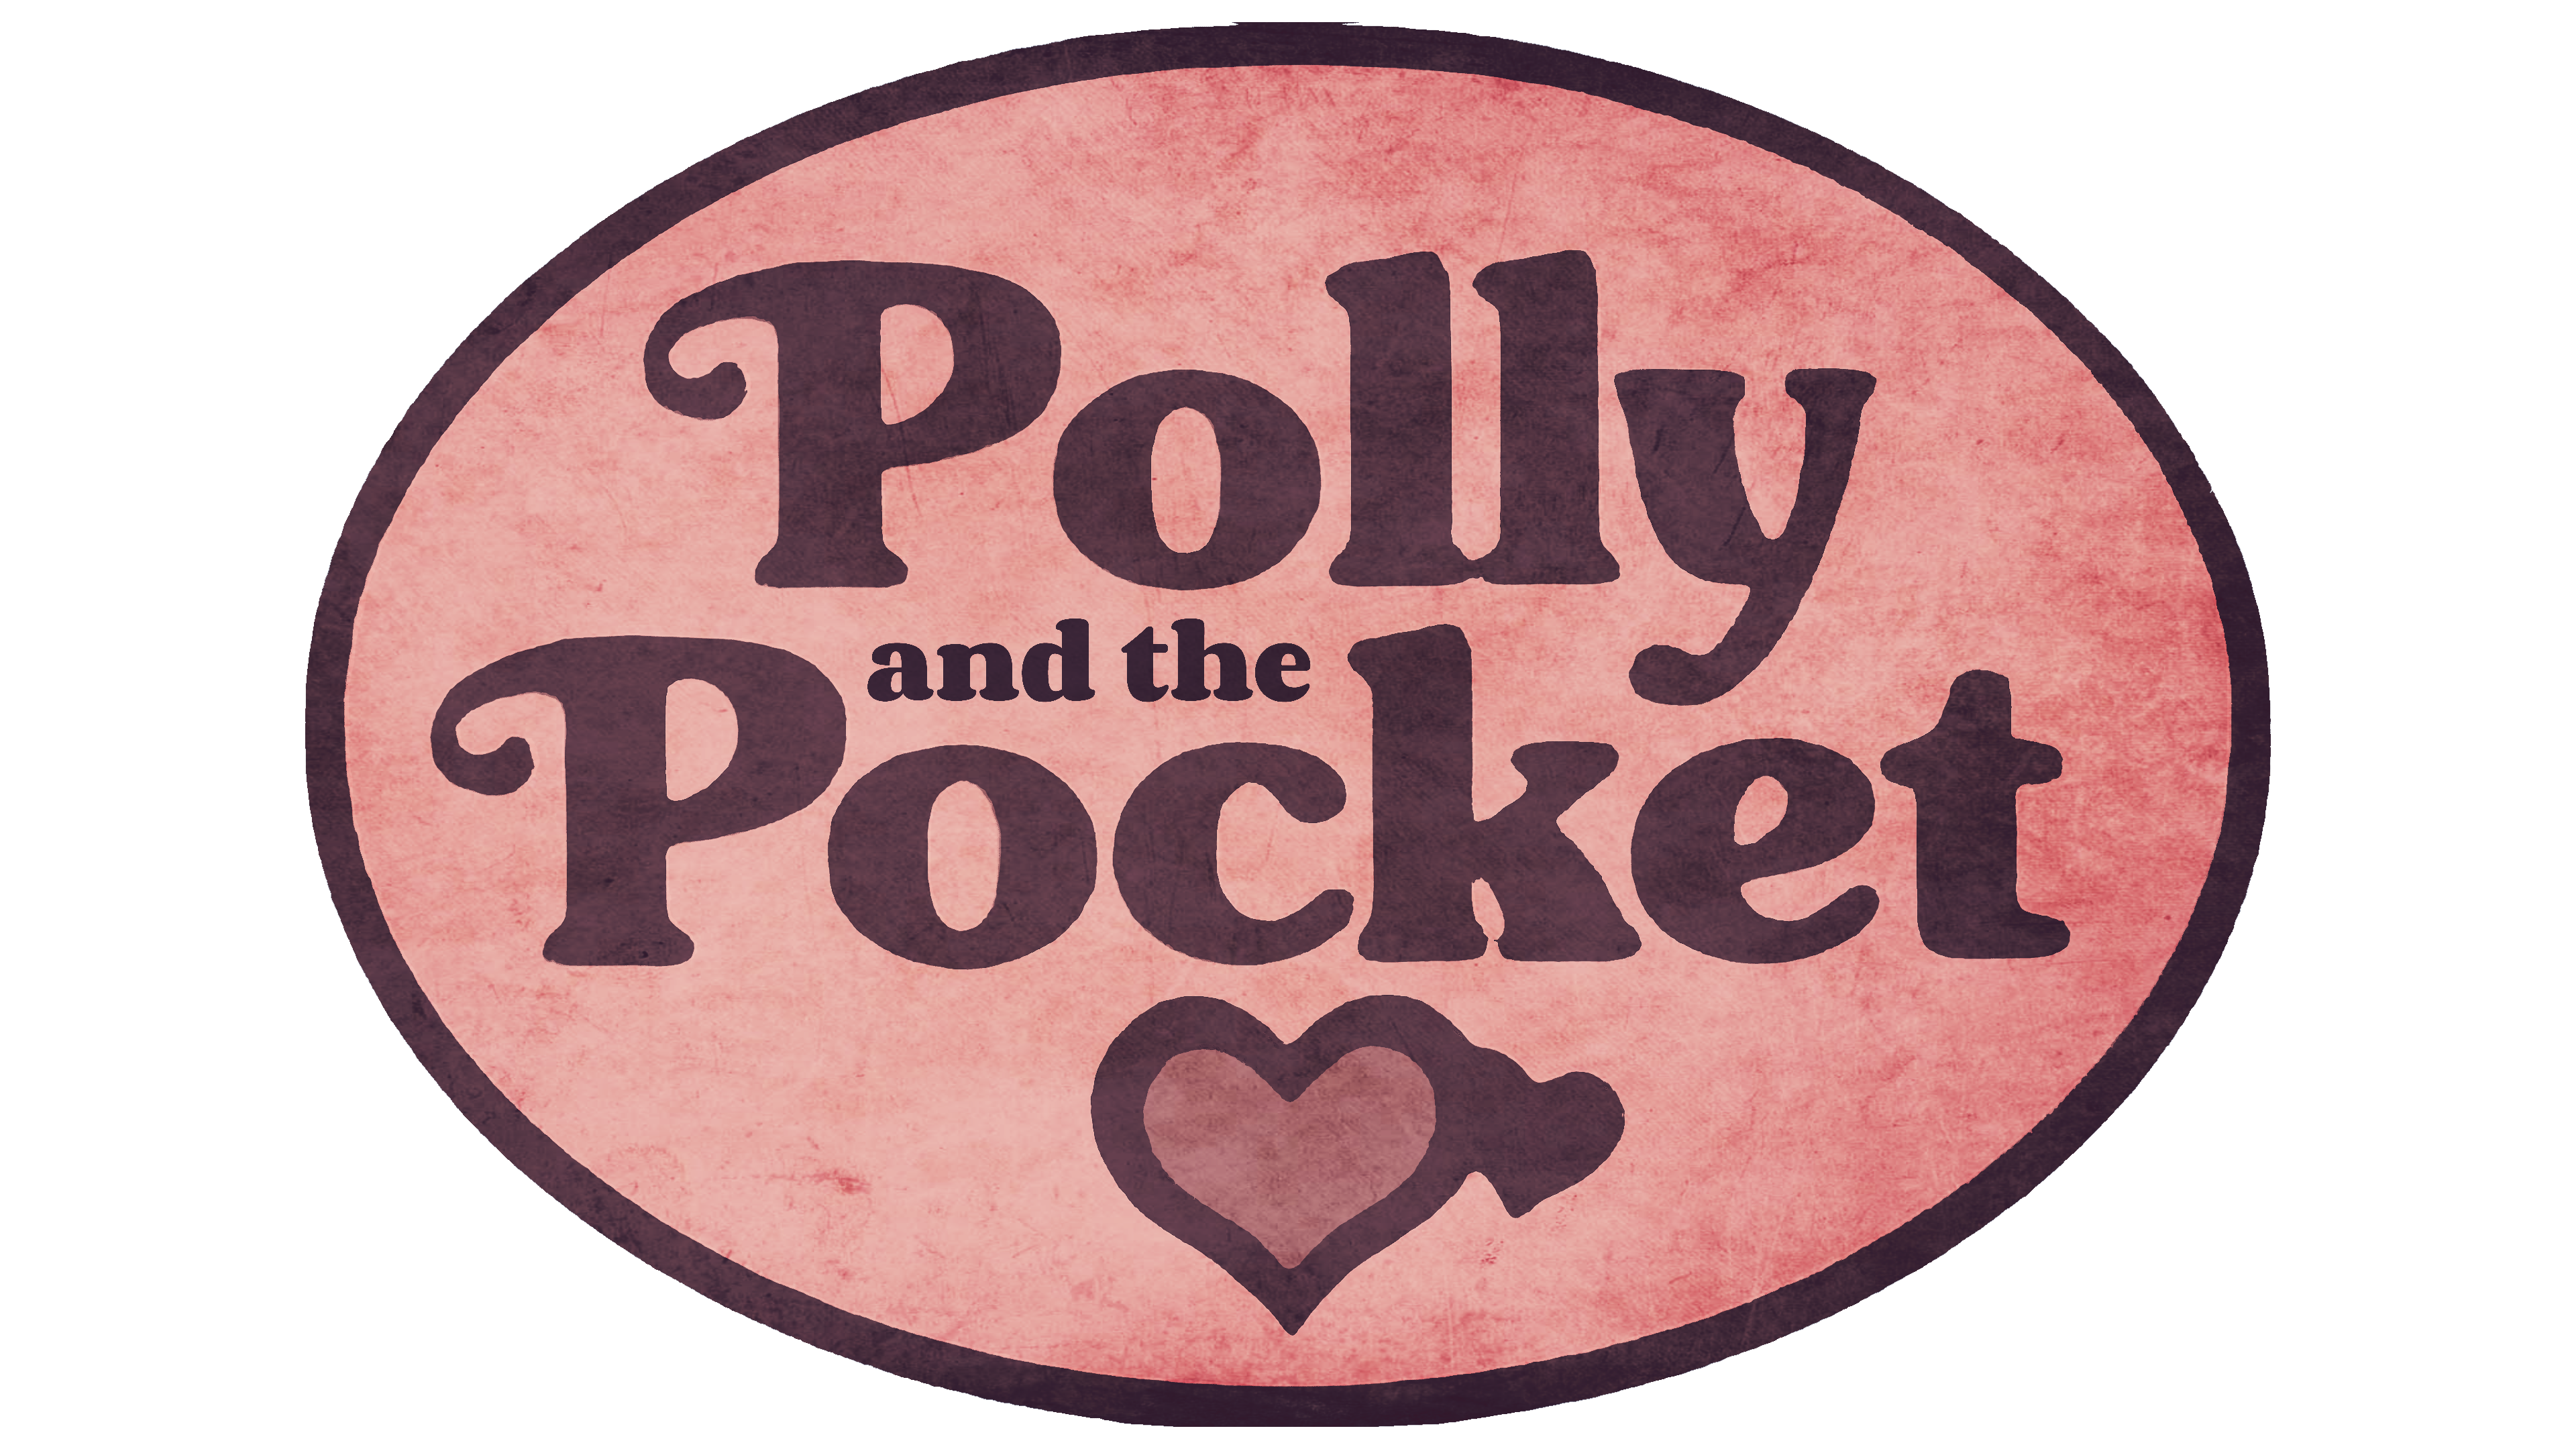 Polly and the pocket